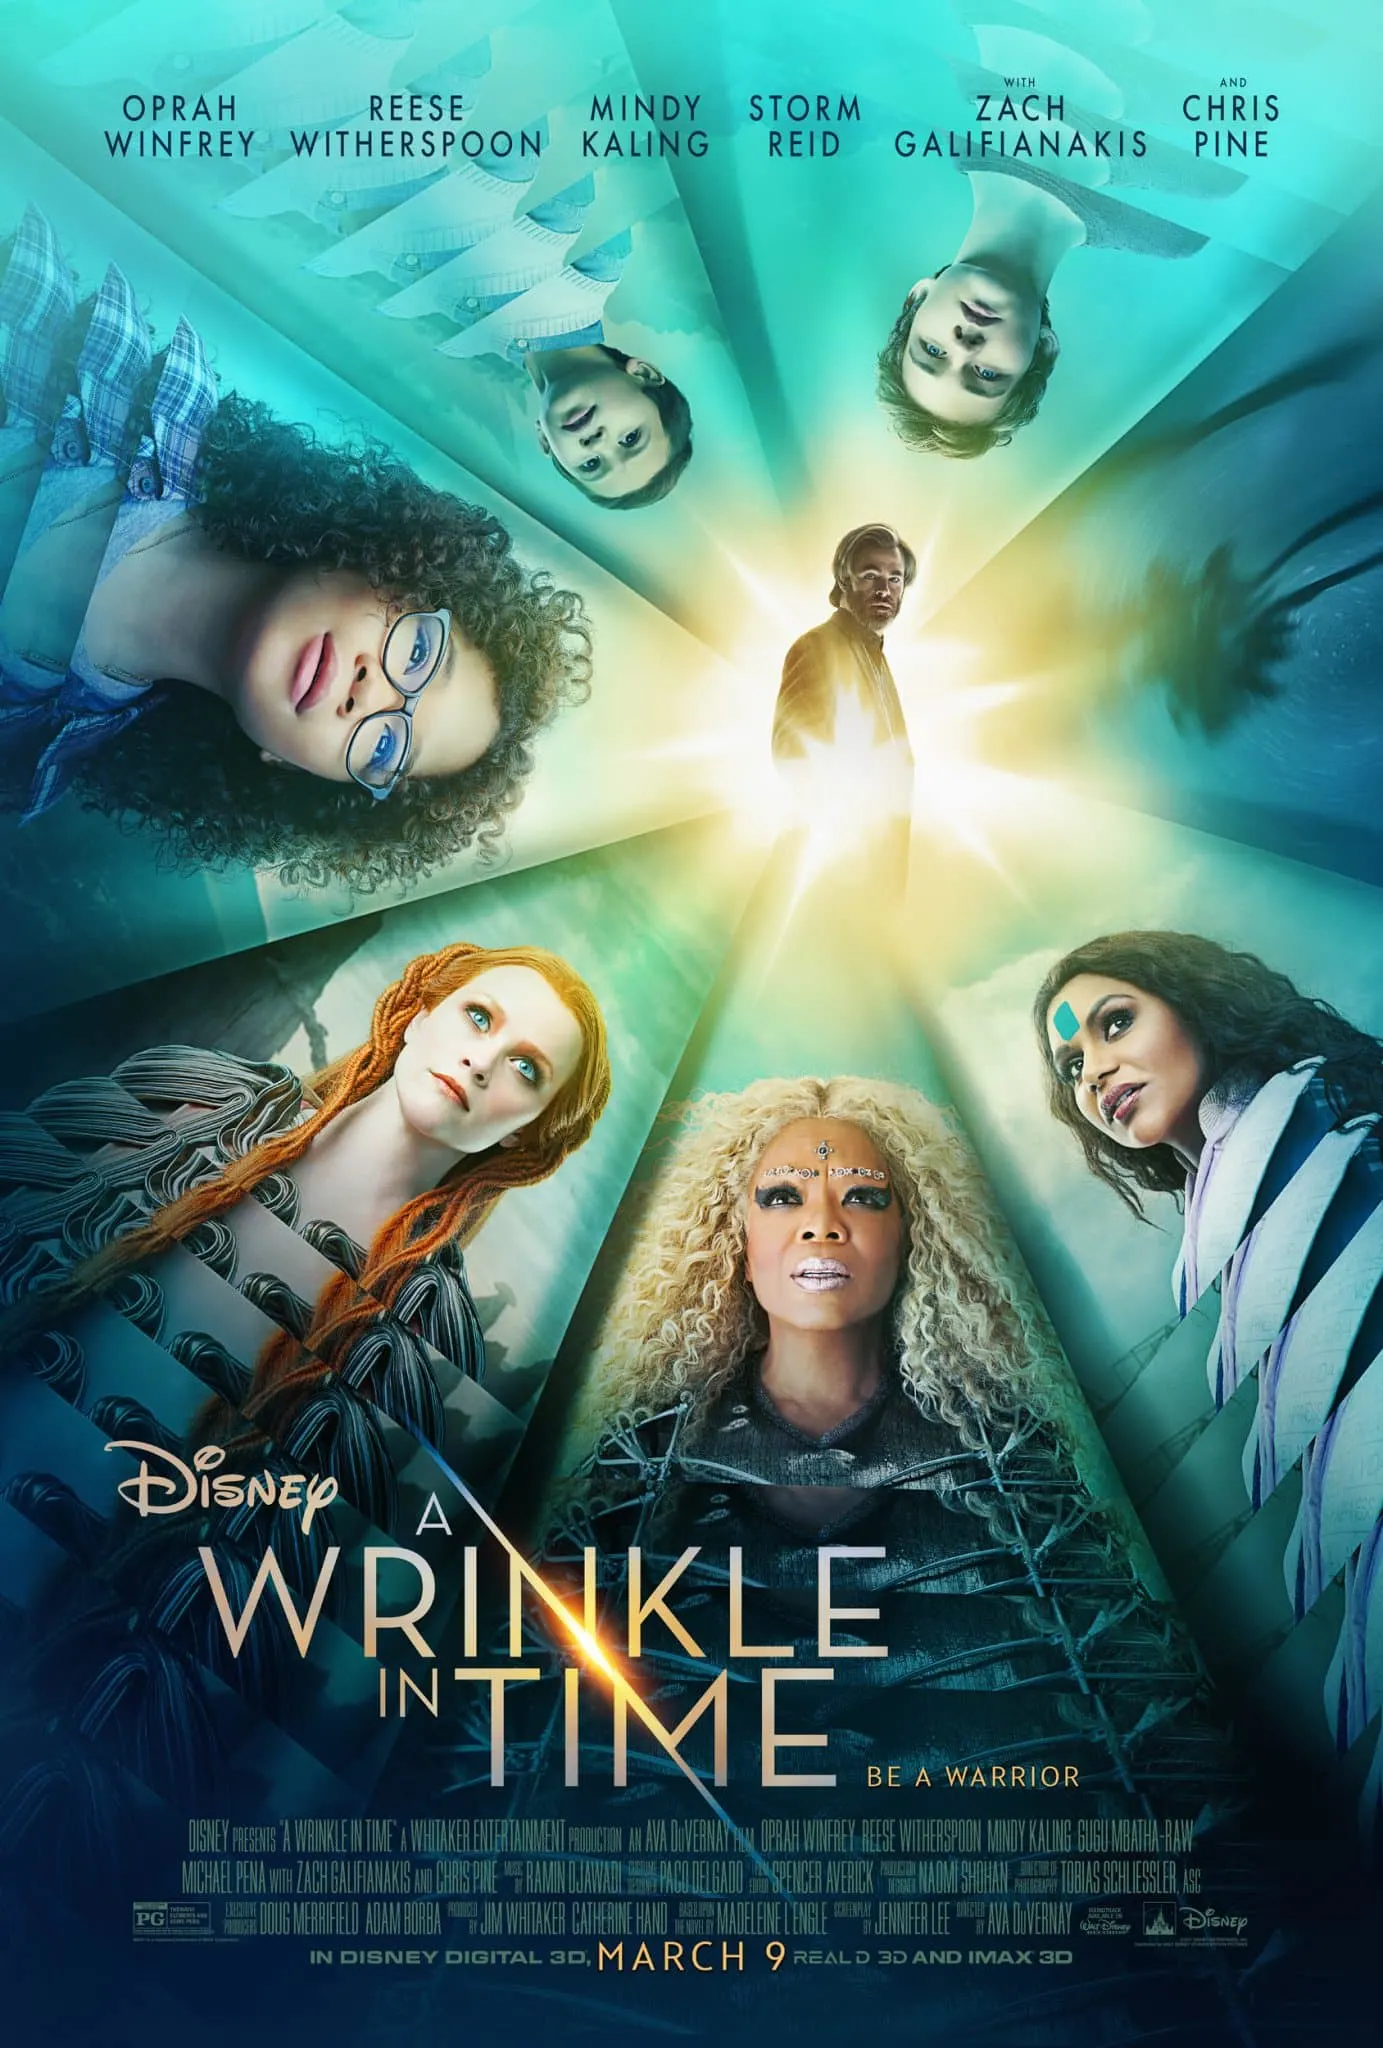 Enter to Win A Wrinkle In Time Digital Copy (Ends 7/6) #WrinkleInTimeBluray